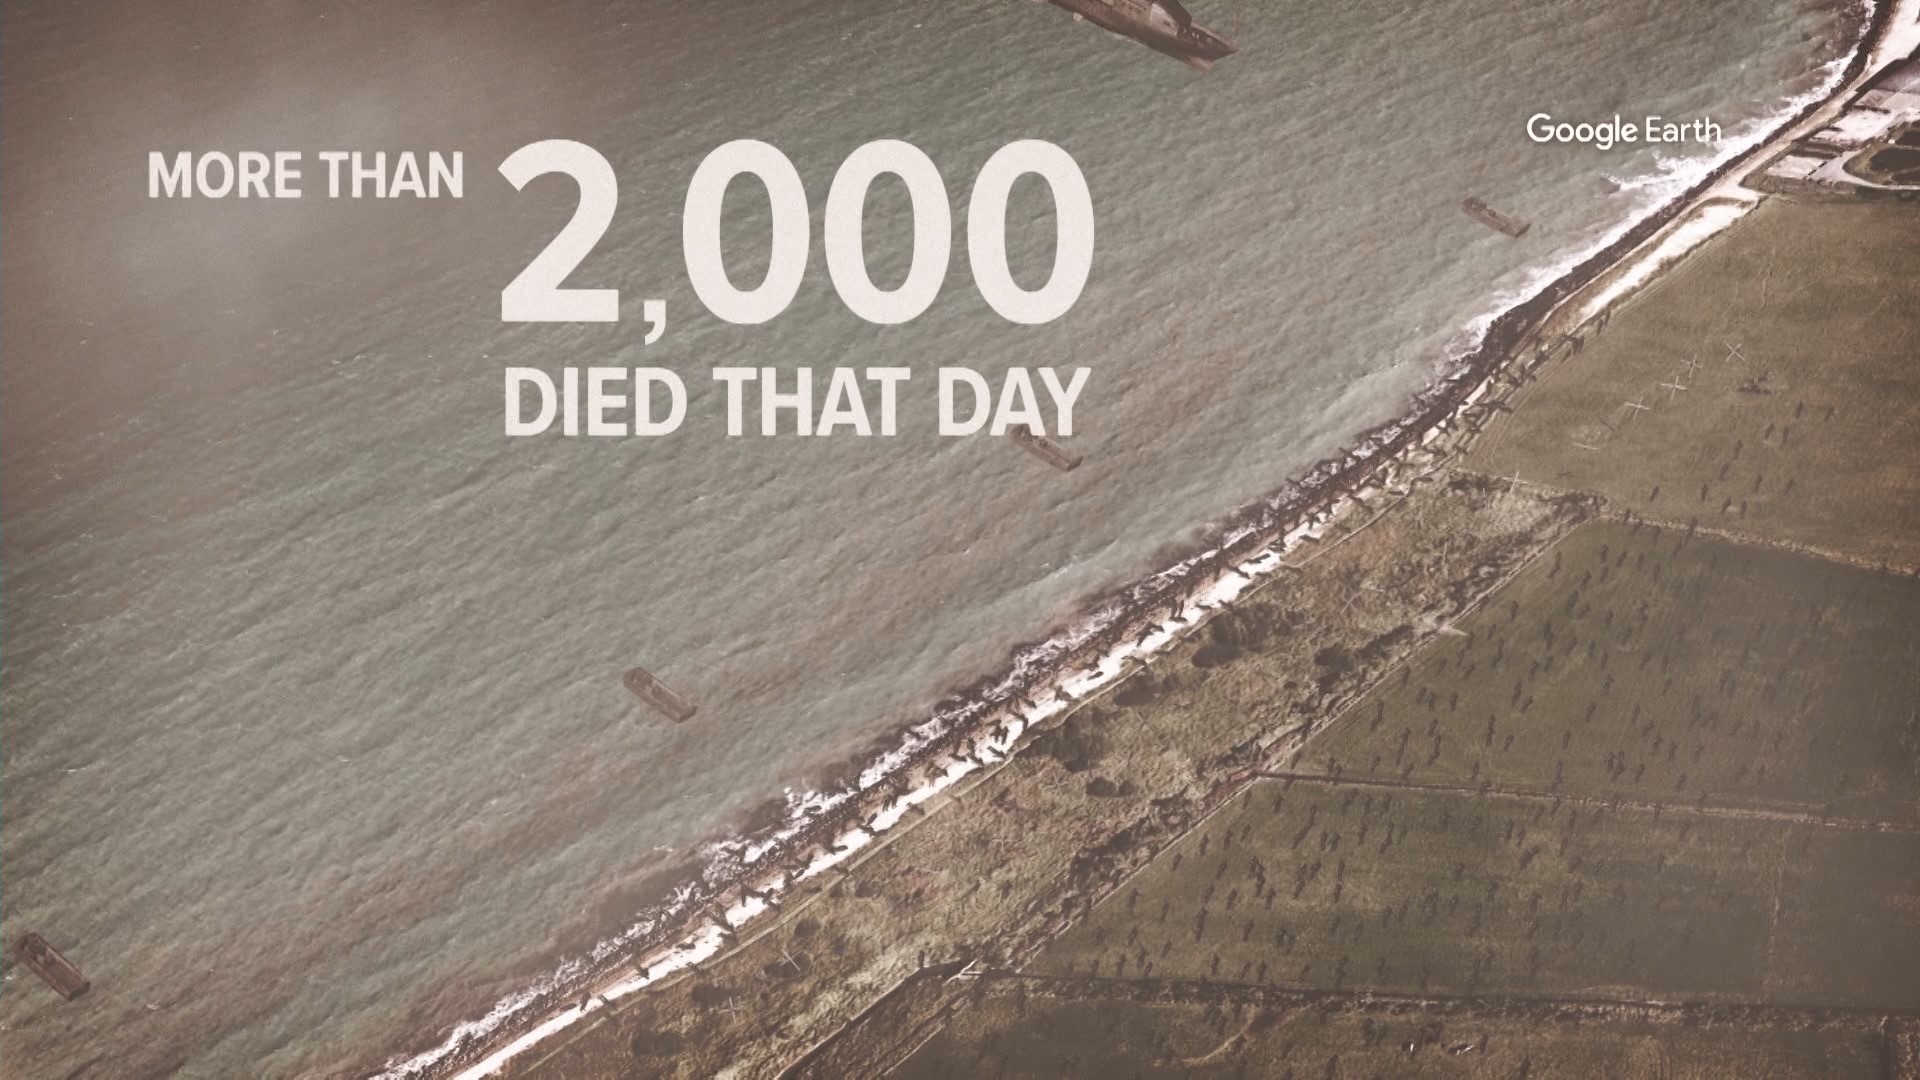 The siege of the beaches that day — code name "Operation Overlord" — is when allied forces attacked Nazi-occupied France in World War II. It's famously known as "D-Day," and June 6 marks its 75-year anniversary.